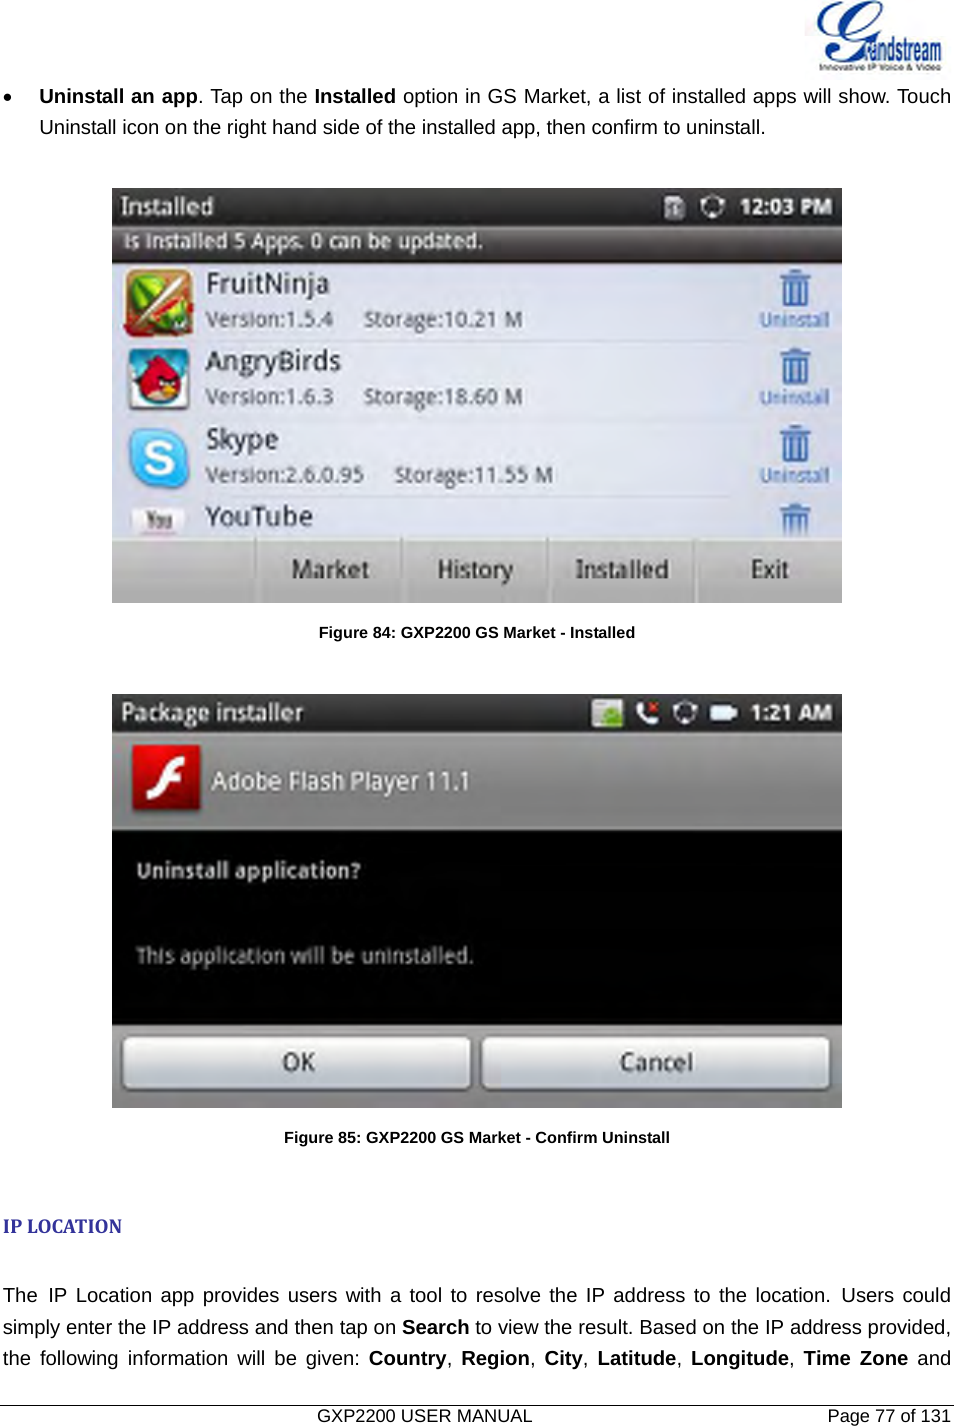   GXP2200 USER MANUAL       Page 77 of 131                                  • Uninstall an app. Tap on the Installed option in GS Market, a list of installed apps will show. Touch Uninstall icon on the right hand side of the installed app, then confirm to uninstall.   Figure 84: GXP2200 GS Market - Installed   Figure 85: GXP2200 GS Market - Confirm Uninstall  IPLOCATION The IP Location app provides users with a tool to resolve the IP address to the location. Users could simply enter the IP address and then tap on Search to view the result. Based on the IP address provided, the following information will be given: Country,  Region,  City,  Latitude,  Longitude,  Time Zone and 